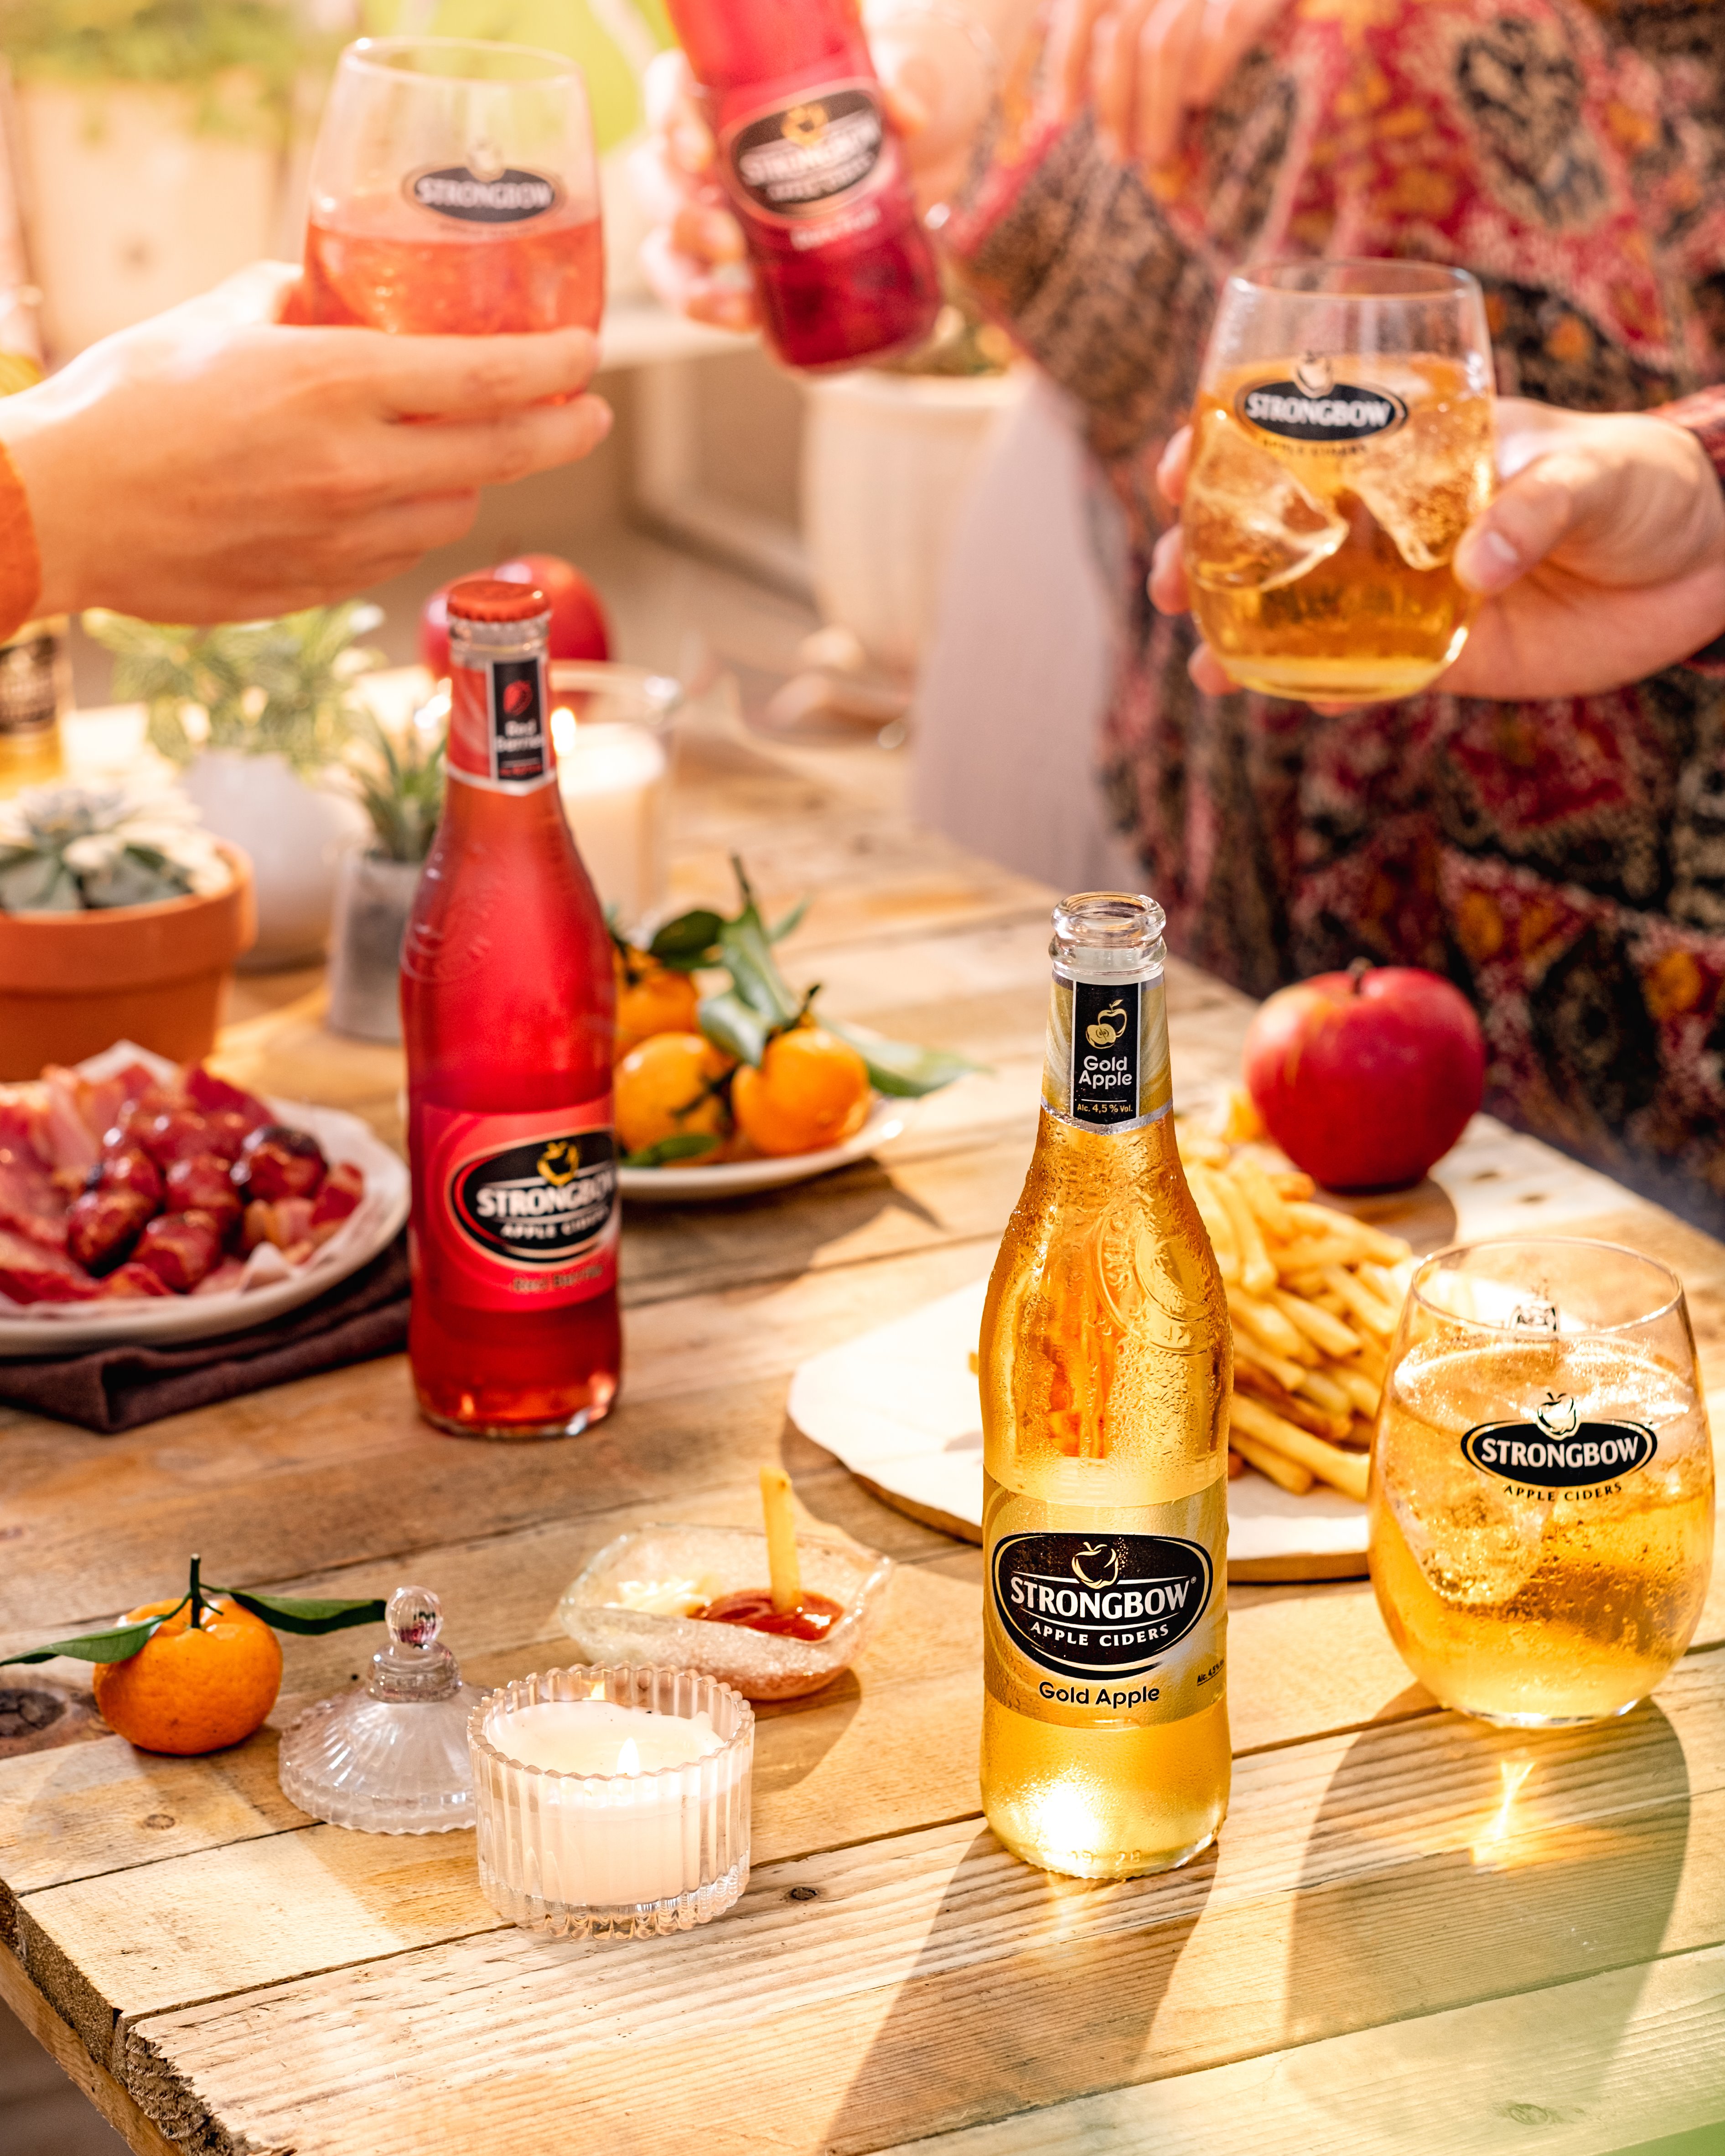 Strongbow Apple Ciders Always On Social Co Maker 2020 VN 4 At Home Gatherings Gold Apple Red Berries Imagery Social Media Global English